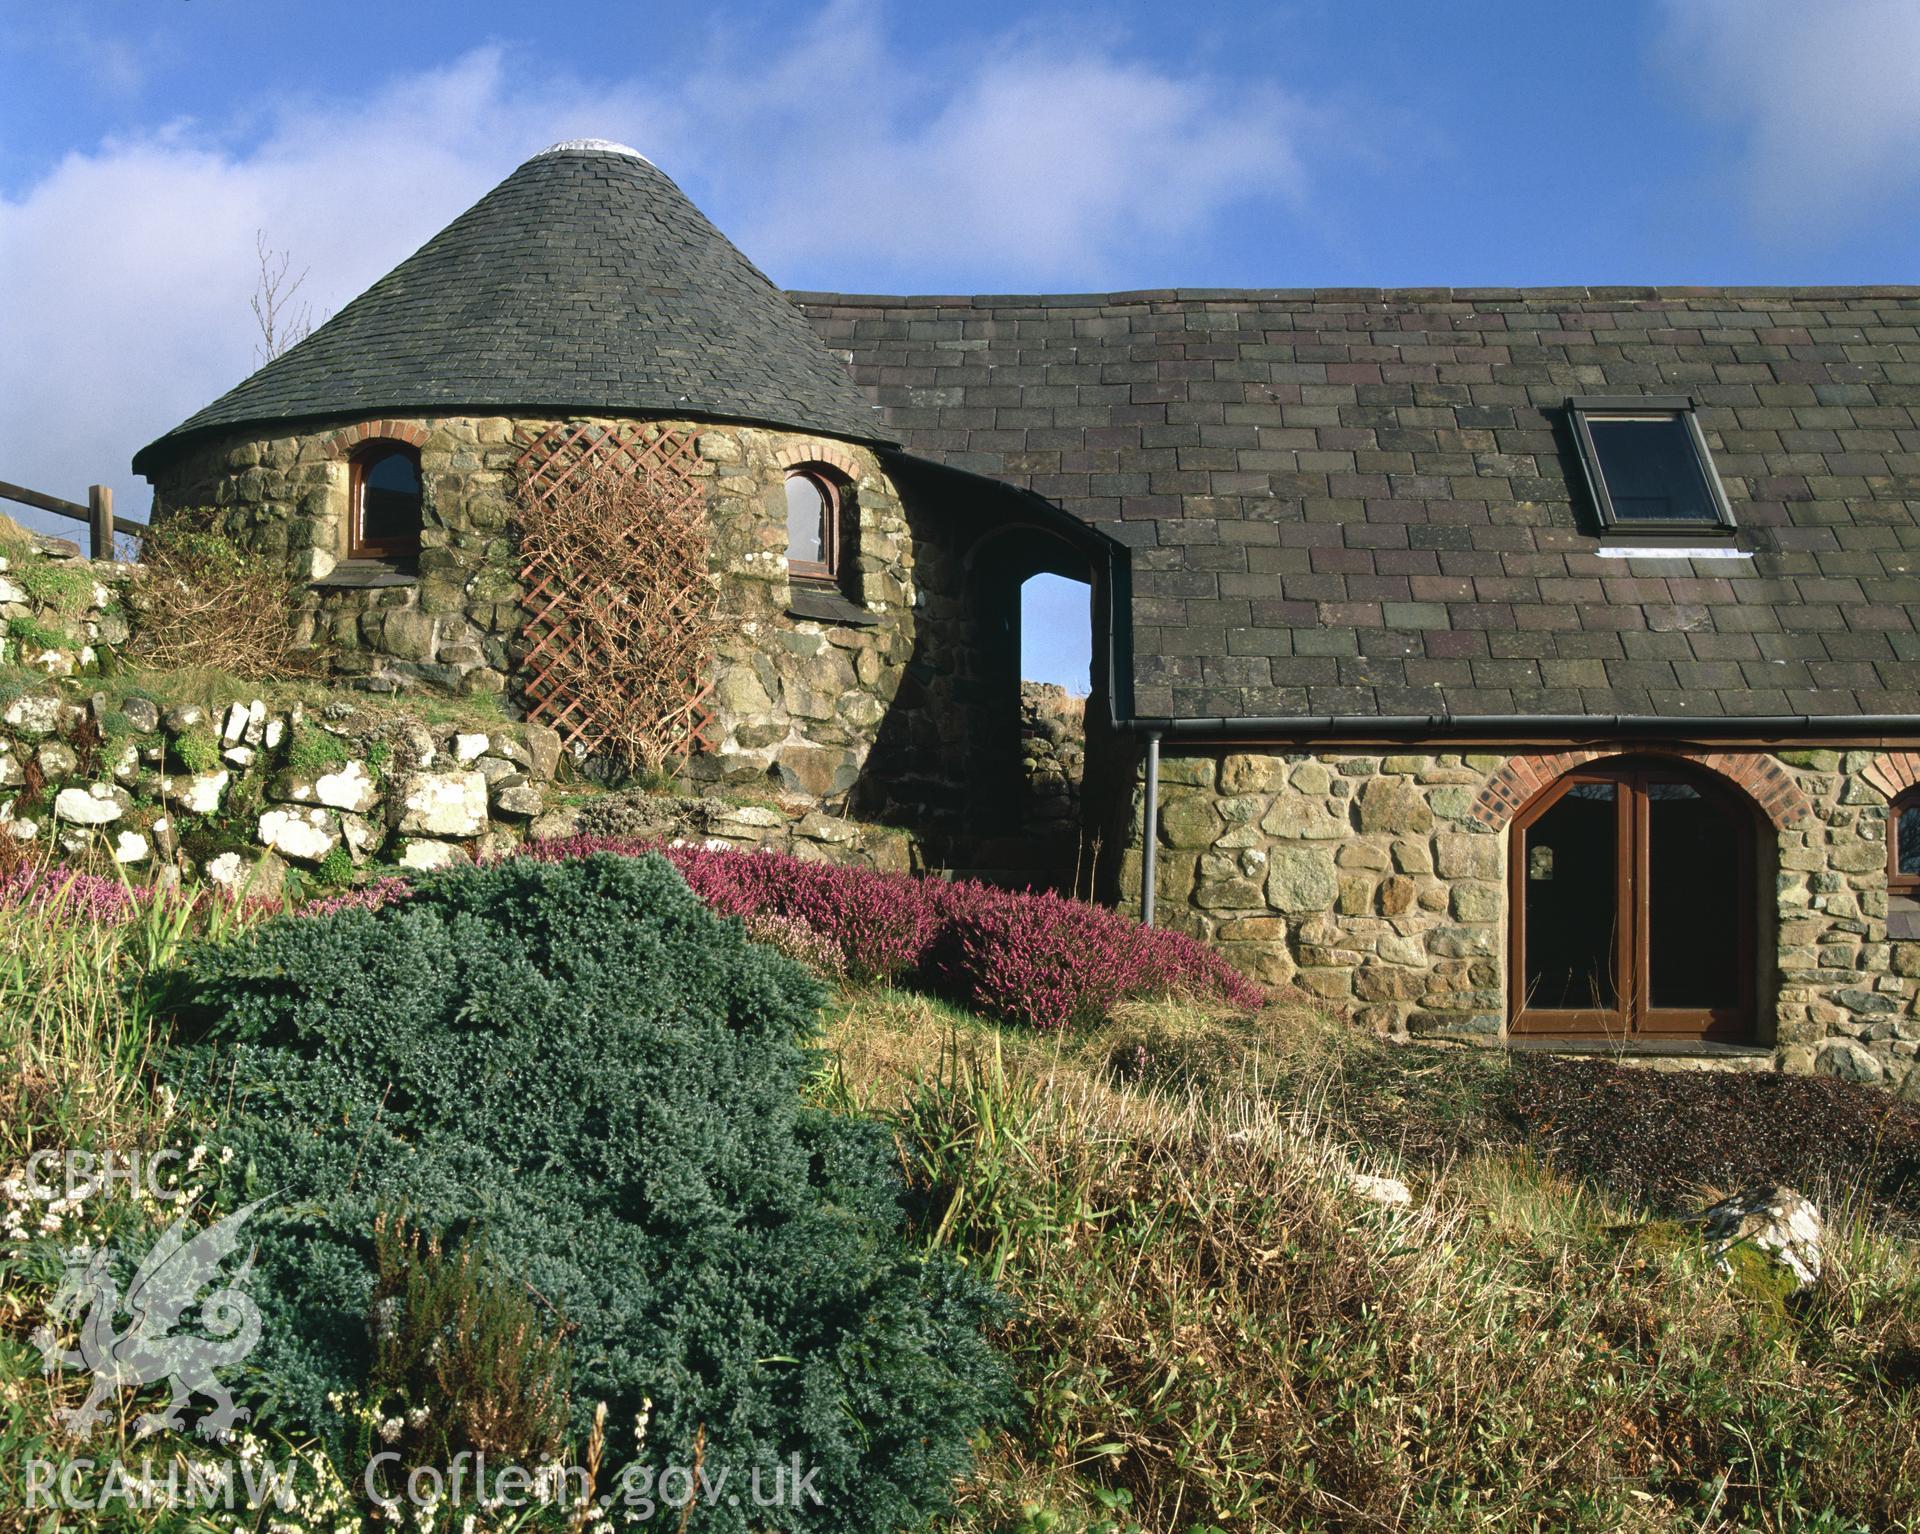 RCAHMW colour transparency showing Ffald-y-brenin chapel, taken by Iain Wright, 2003.